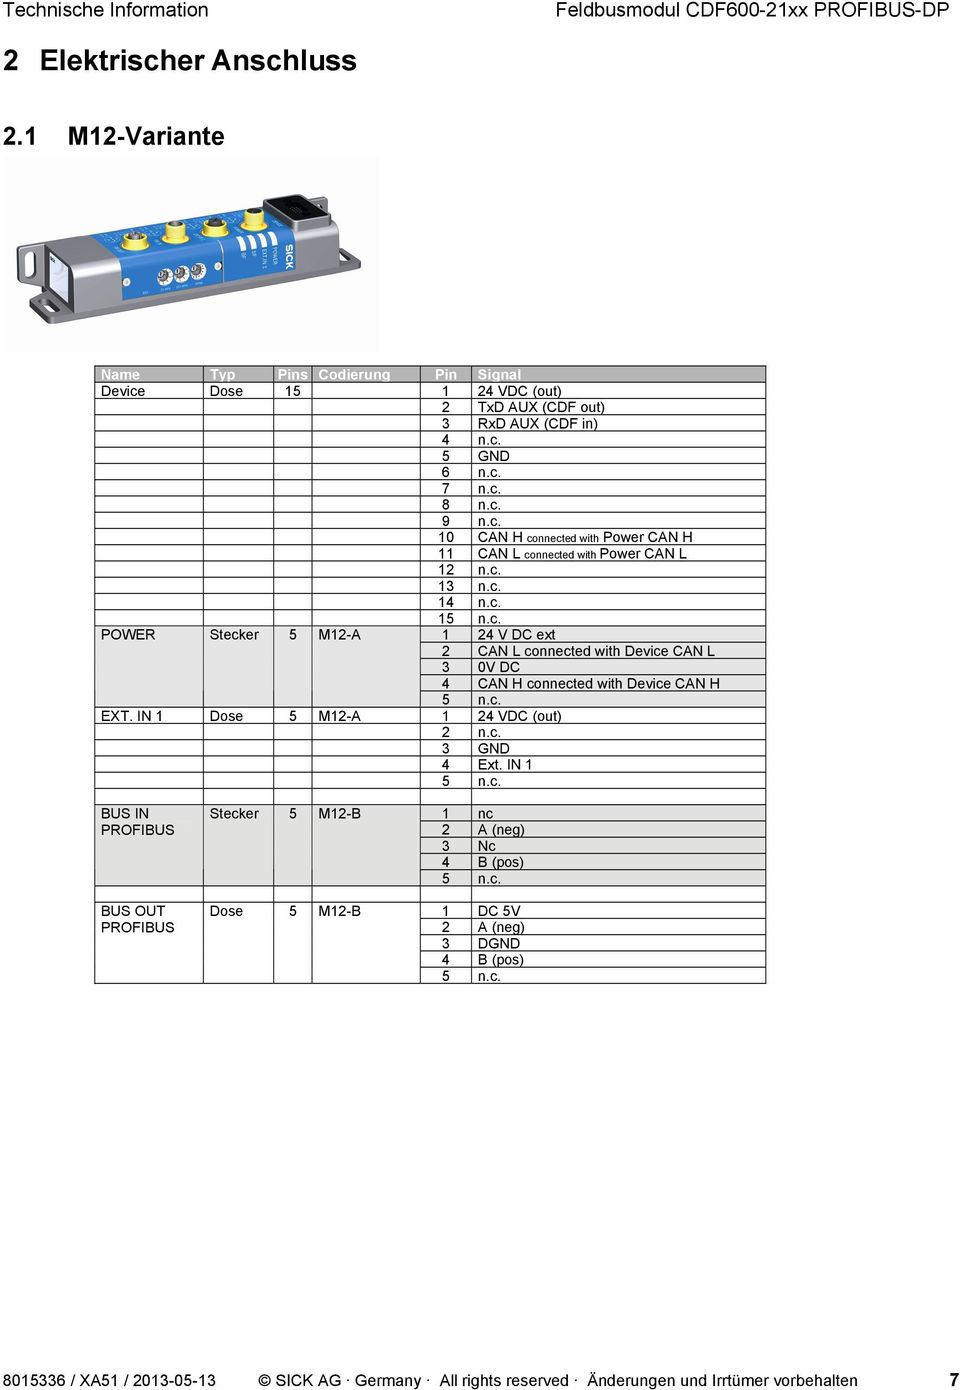 c. EXT. IN 1 Dose 5 M12-A 1 24 VDC (out) 2 n.c. 3 GND 4 Ext. IN 1 5 n.c. 4 CAN H connected with Device CAN H BUS IN PROFIBUS BUS OUT PROFIBUS Stecker 5 M12-B Dose 5 M12-B 1 nc 2 A (neg) 3 Nc 4 B (pos) 5 n.